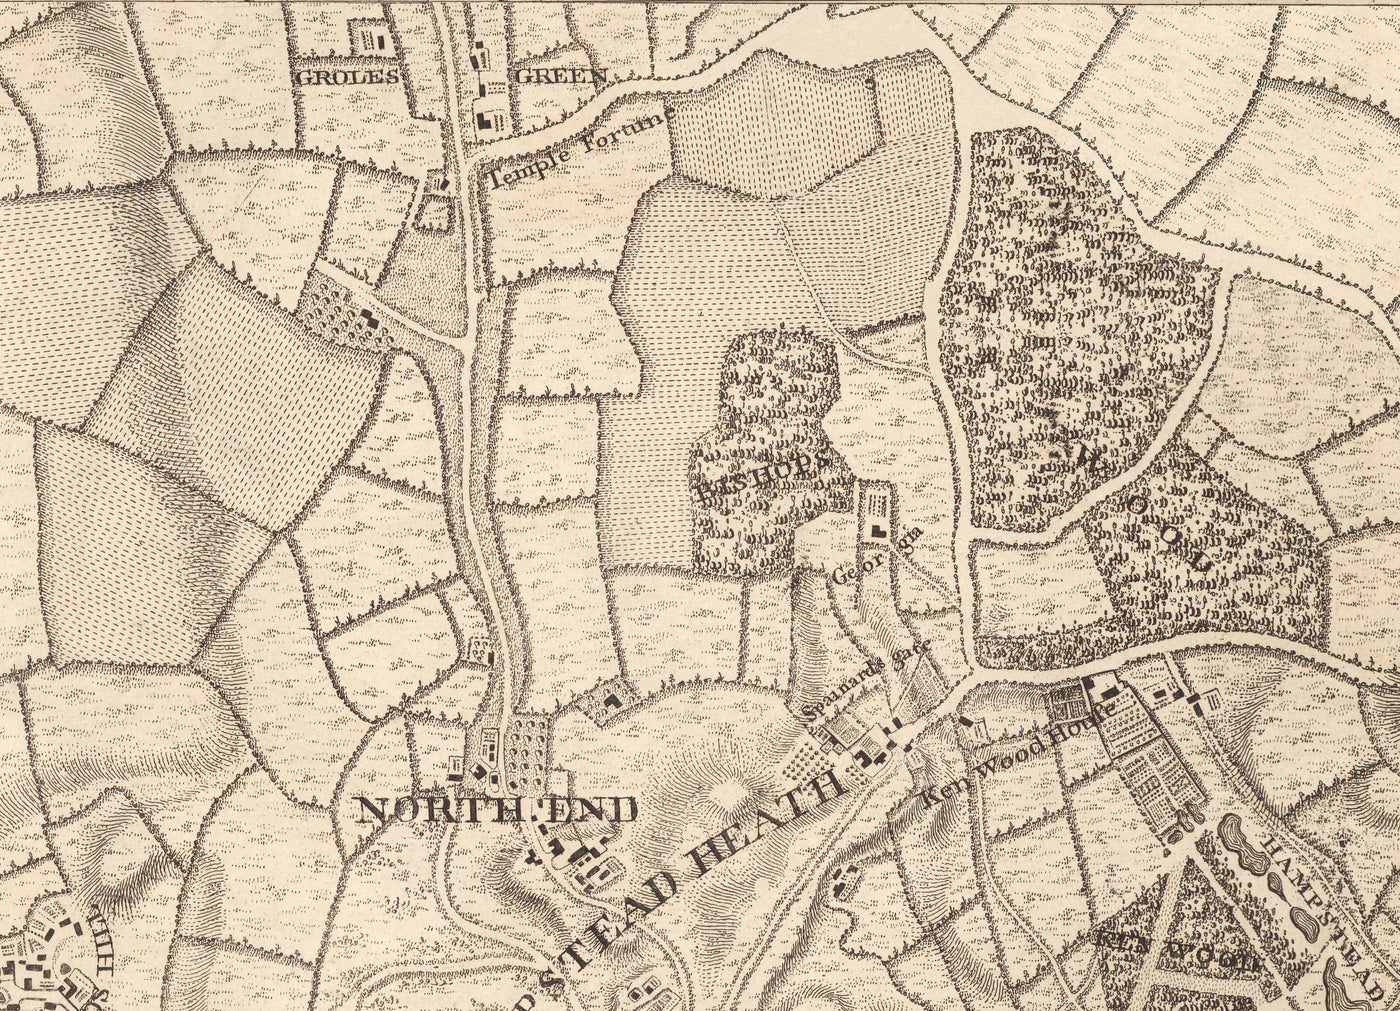 Old Map of West and North West London in 1746 by John Rocque - Hampstead, Kingsbury, Neasden, Willesden, West End, NW2, NW3, NW5, NW6, NW8, NW10, W9, W10